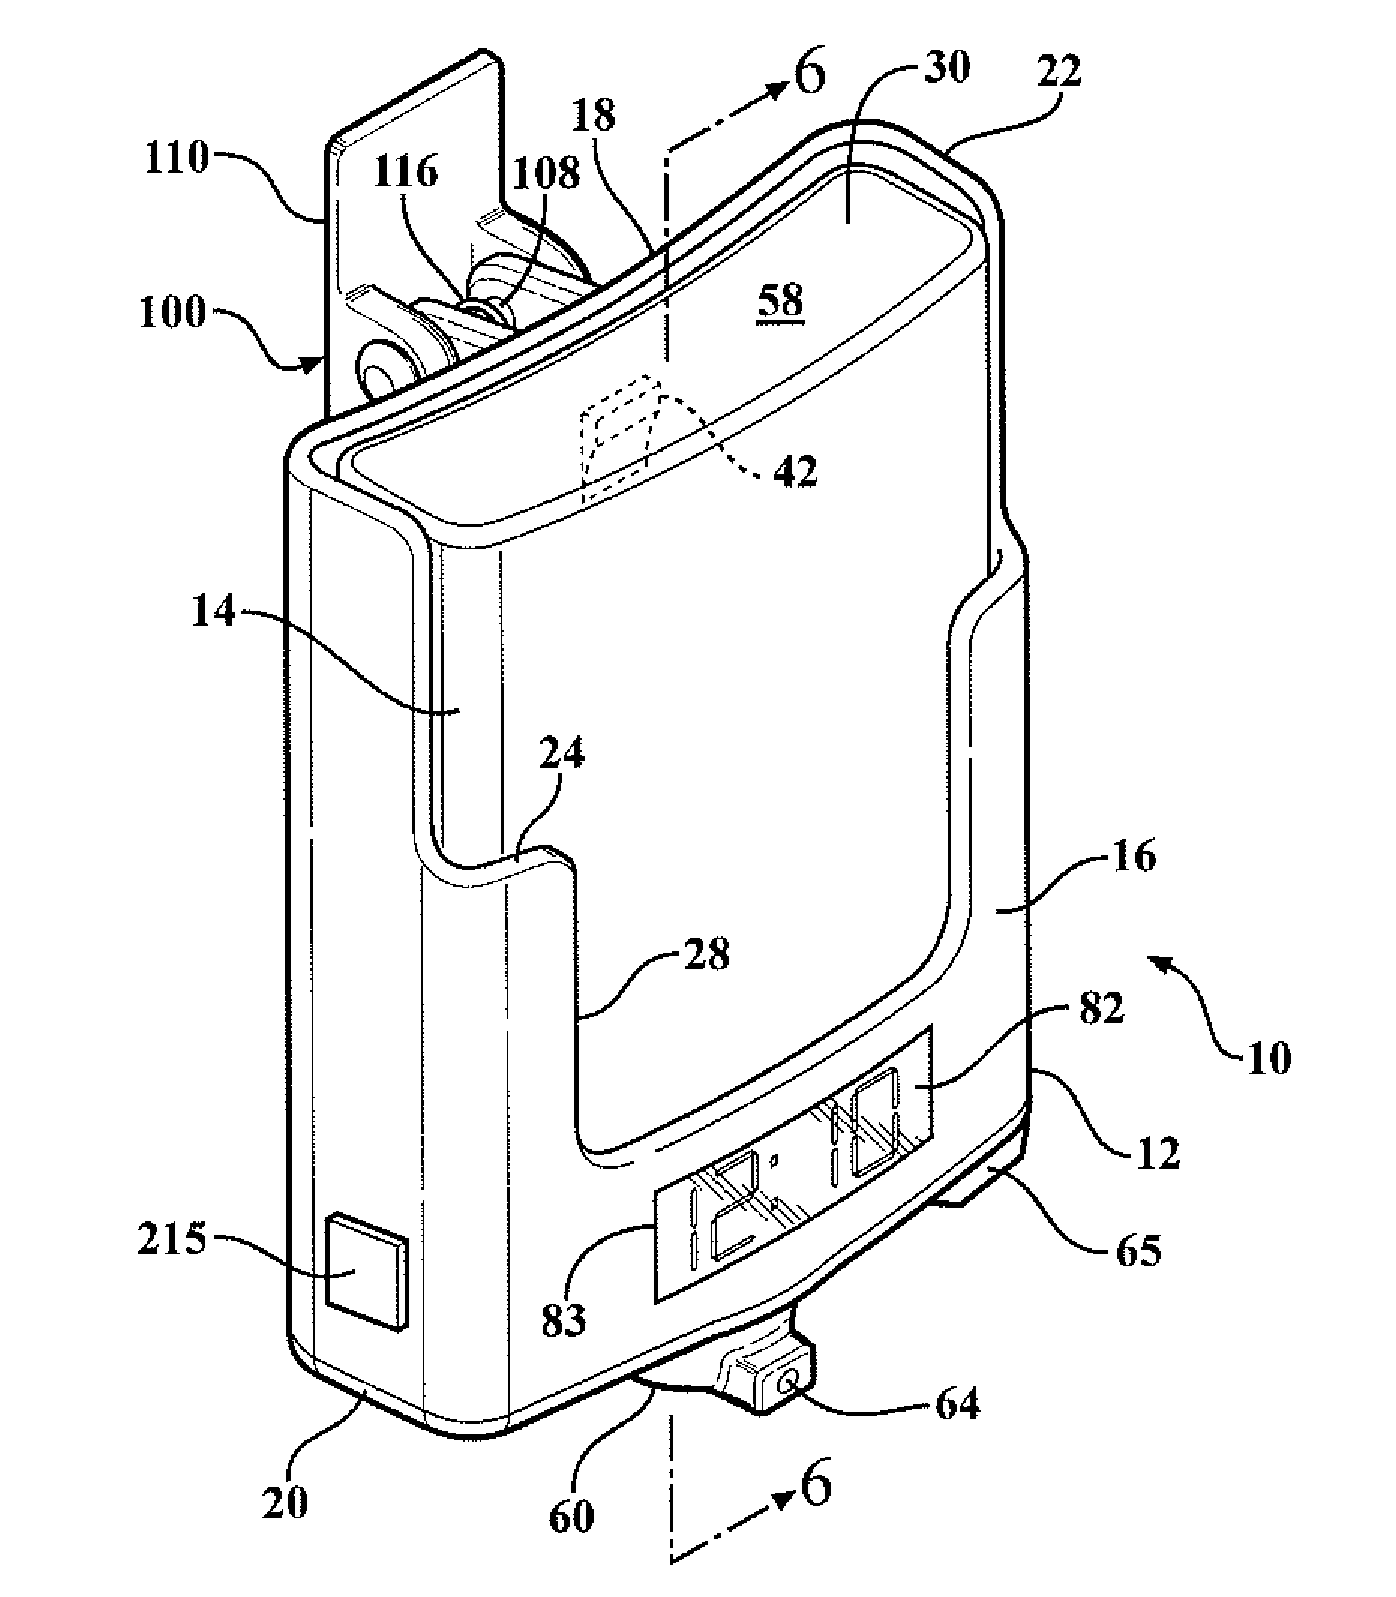 Dispenser assembly for dispensing disinfectant fluid and data collection and monitoring system for monitoring and reporting dispensing events